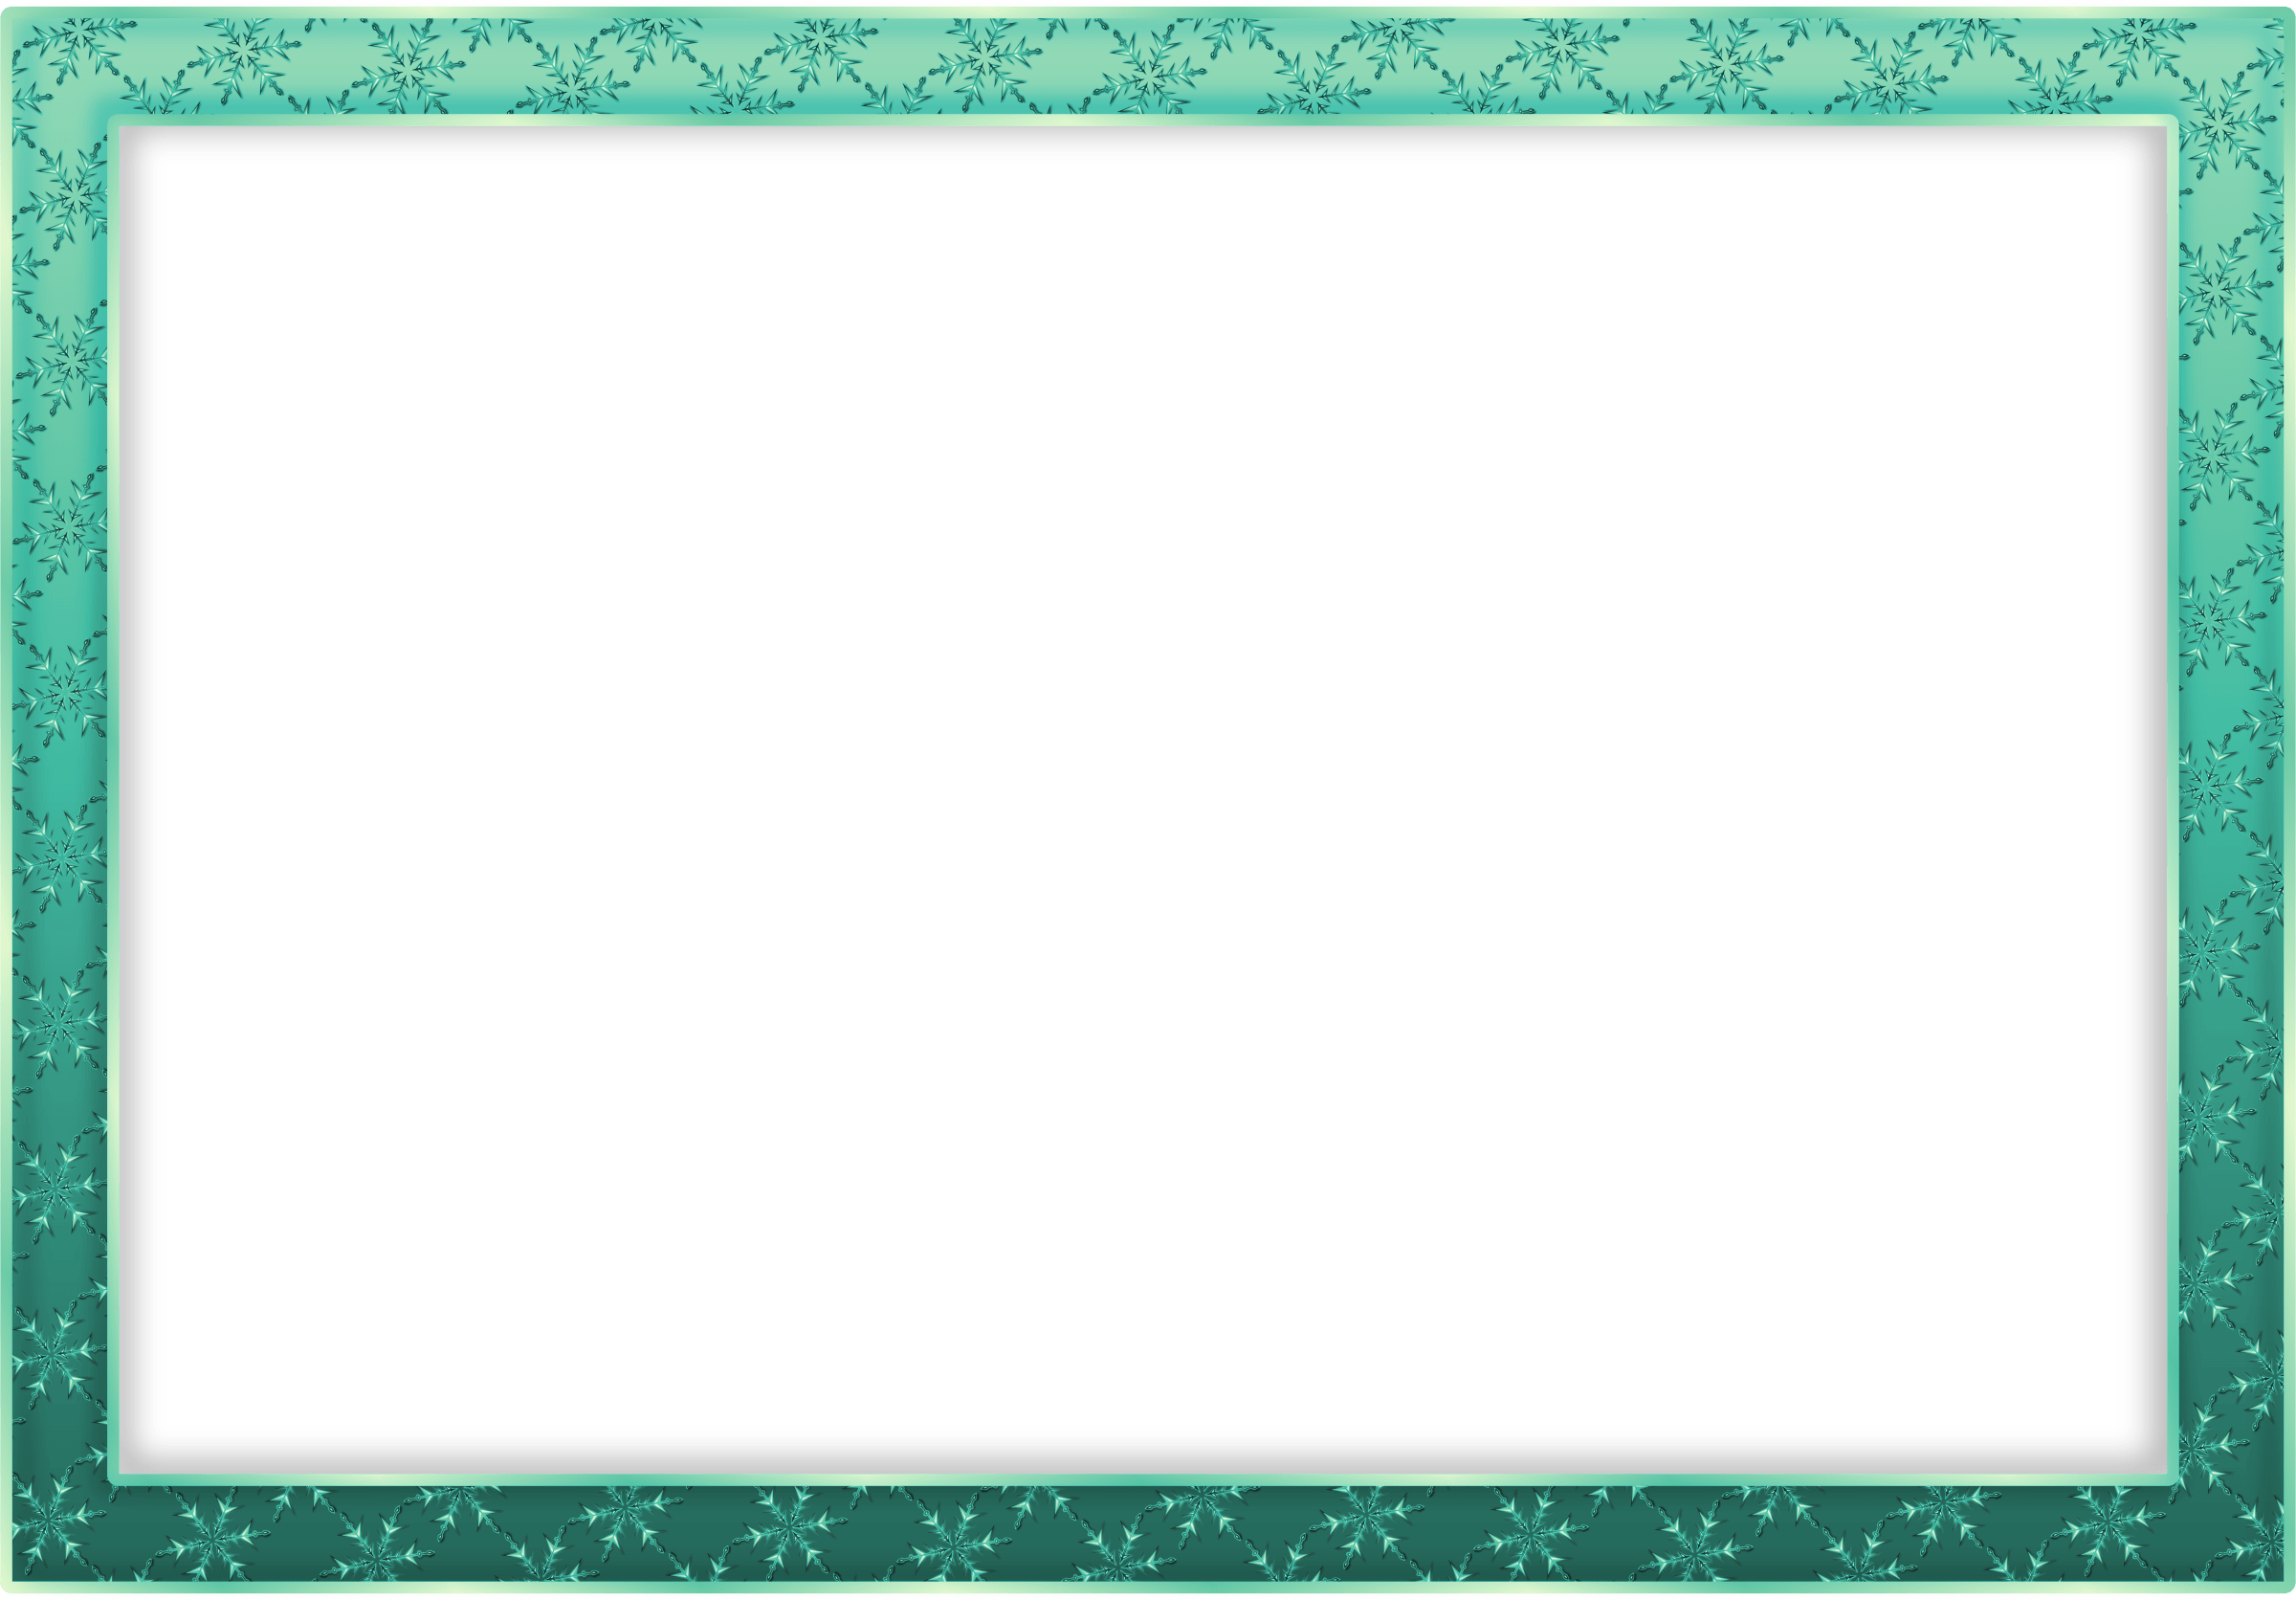 Abstract Teal Frame PNG Transparent Image